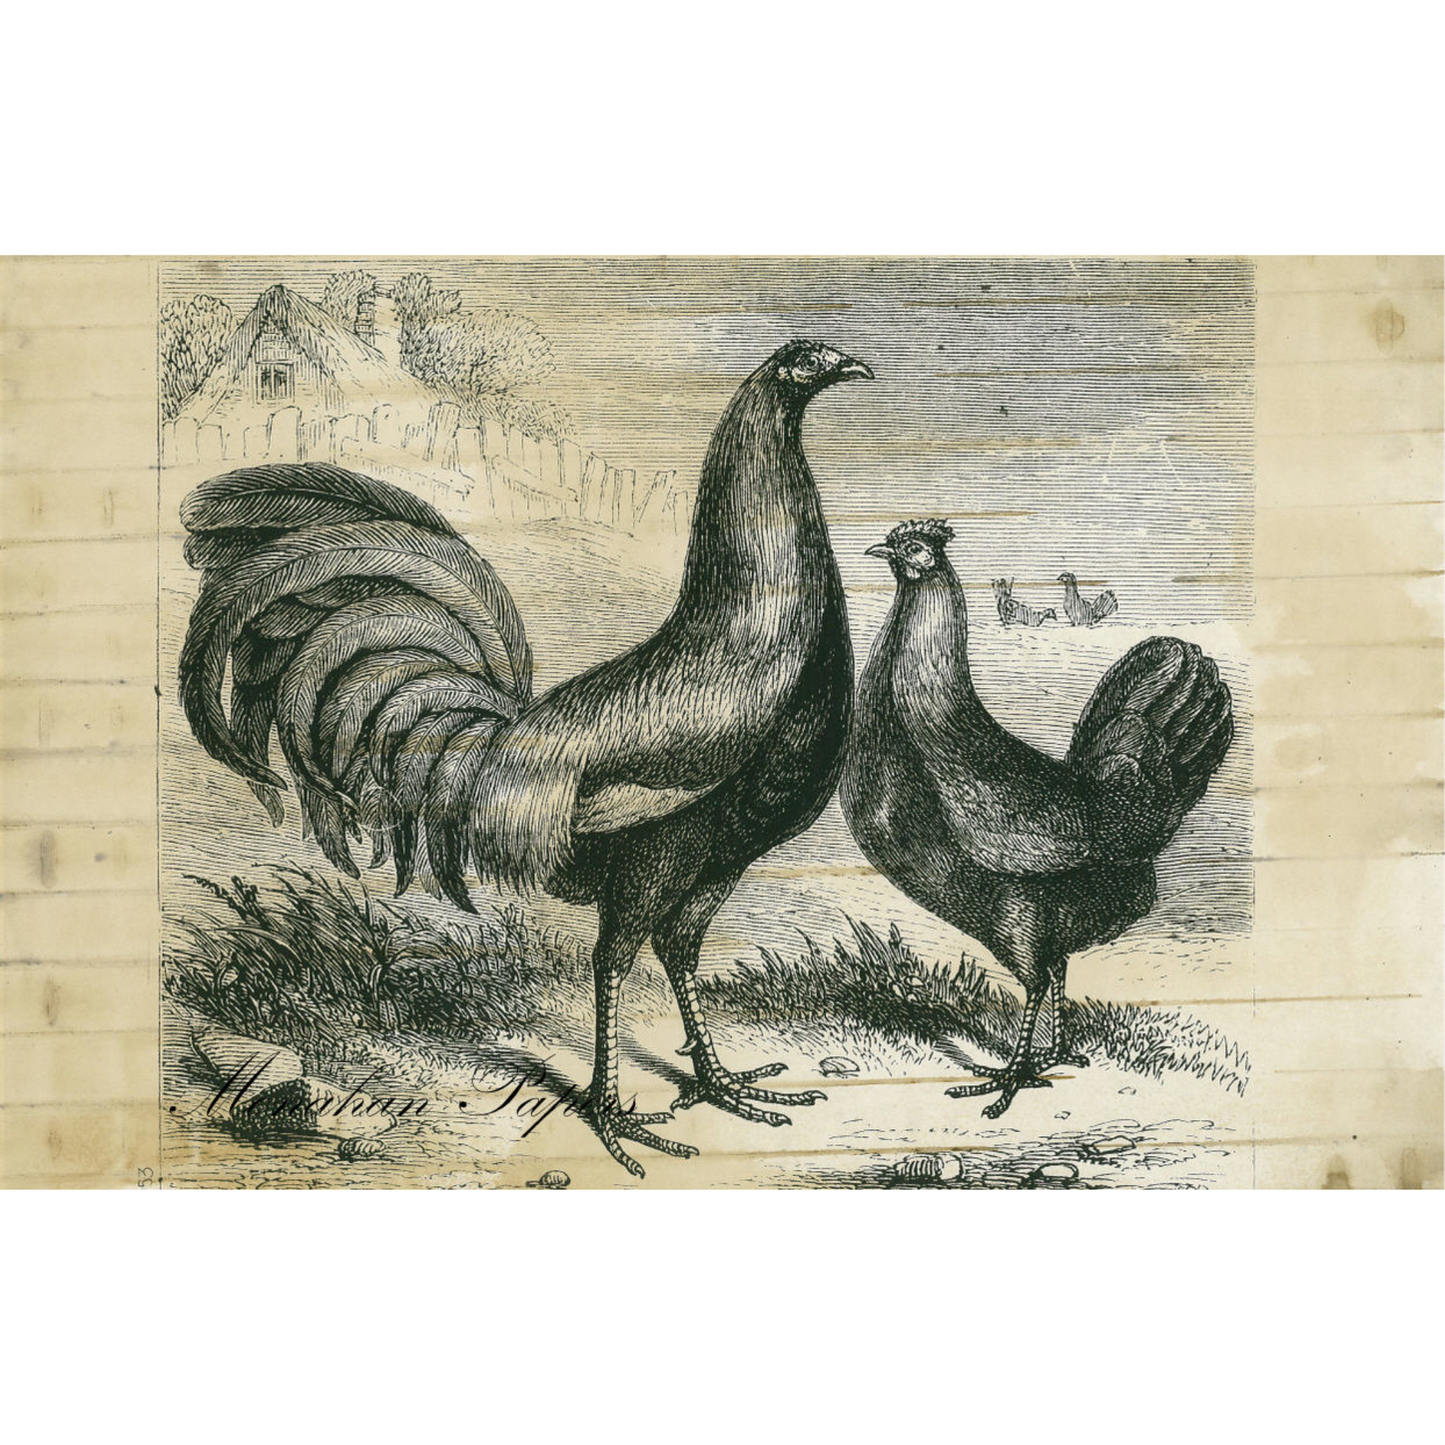 Game Fowls SPS153 Decoupage Paper by Monahan Papers available at Milton's Daughter.  11" x 17". Pair of game fowl in black and white.